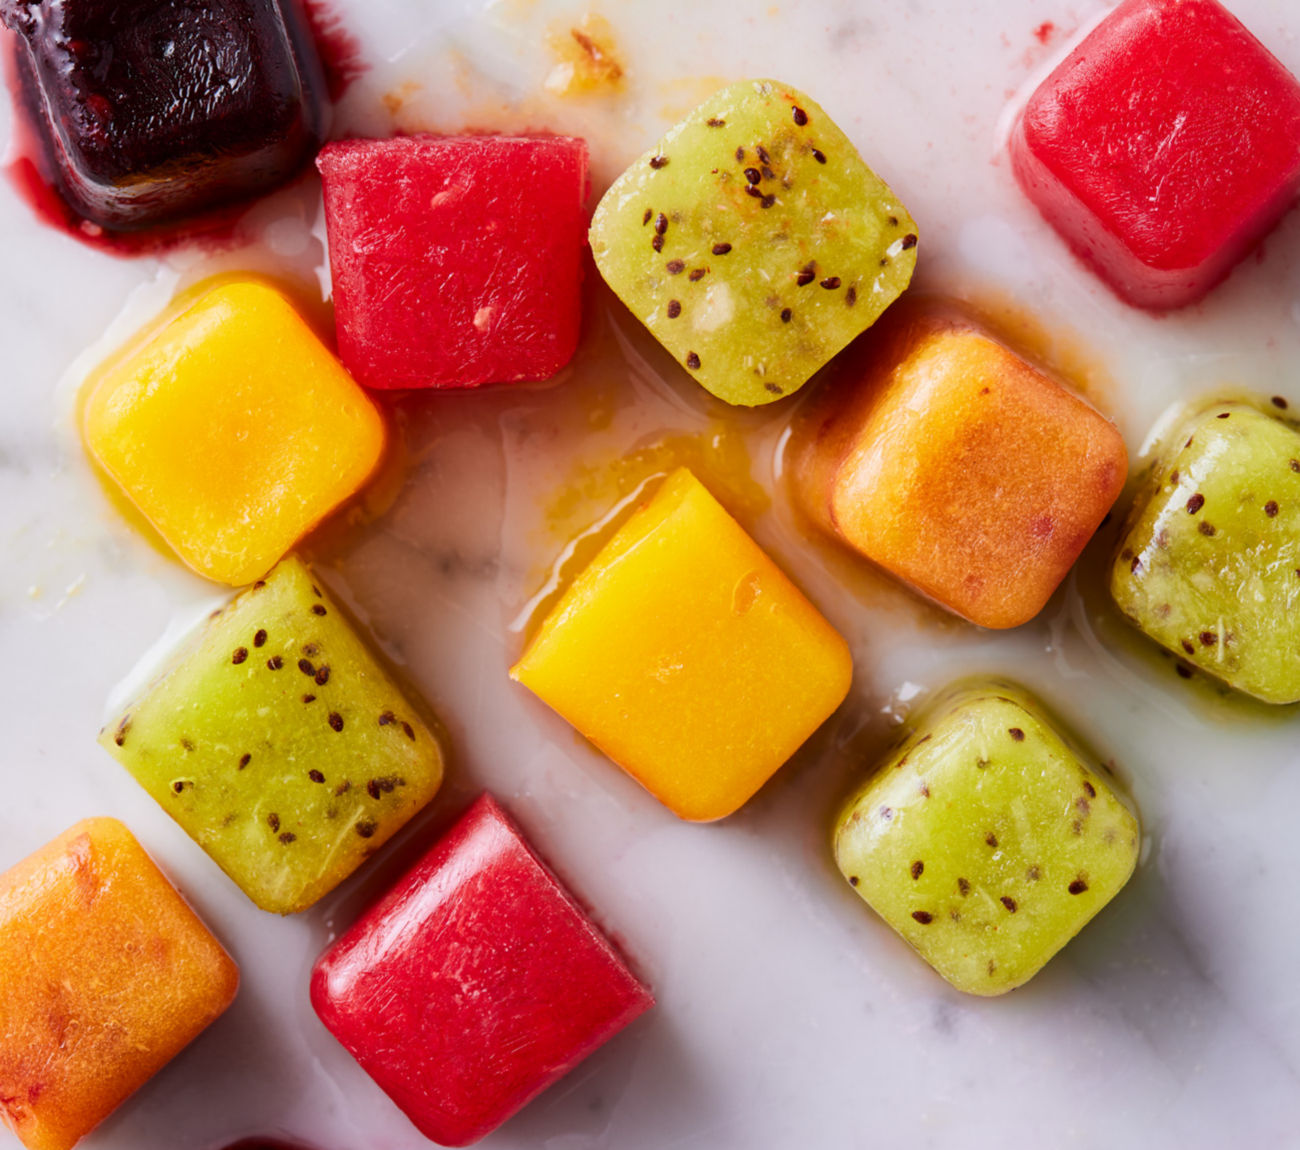 Freeze-dried Smoothie Cubes 